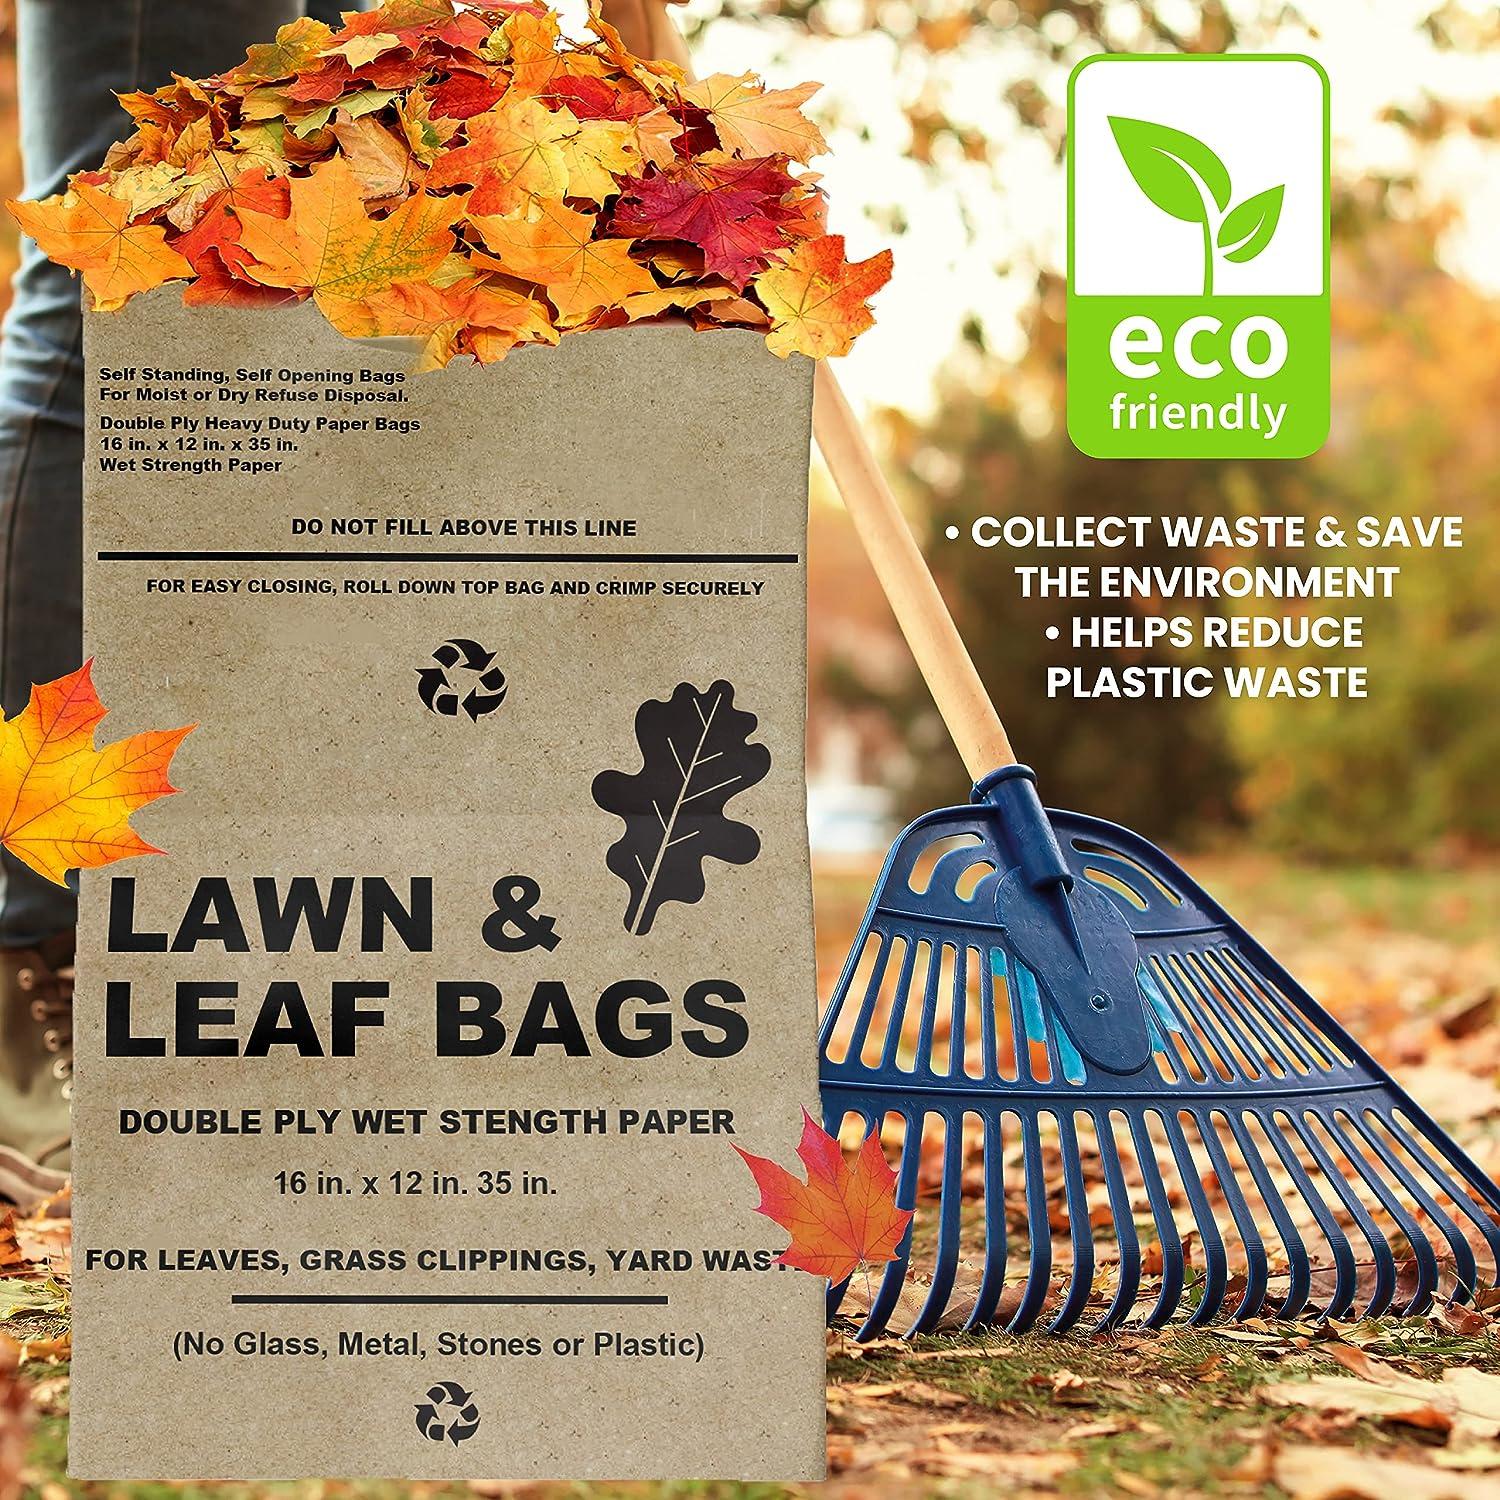 Lawn and Leaf Bags 30 Gallon - Pack of 10 - Tear Resistant Eco